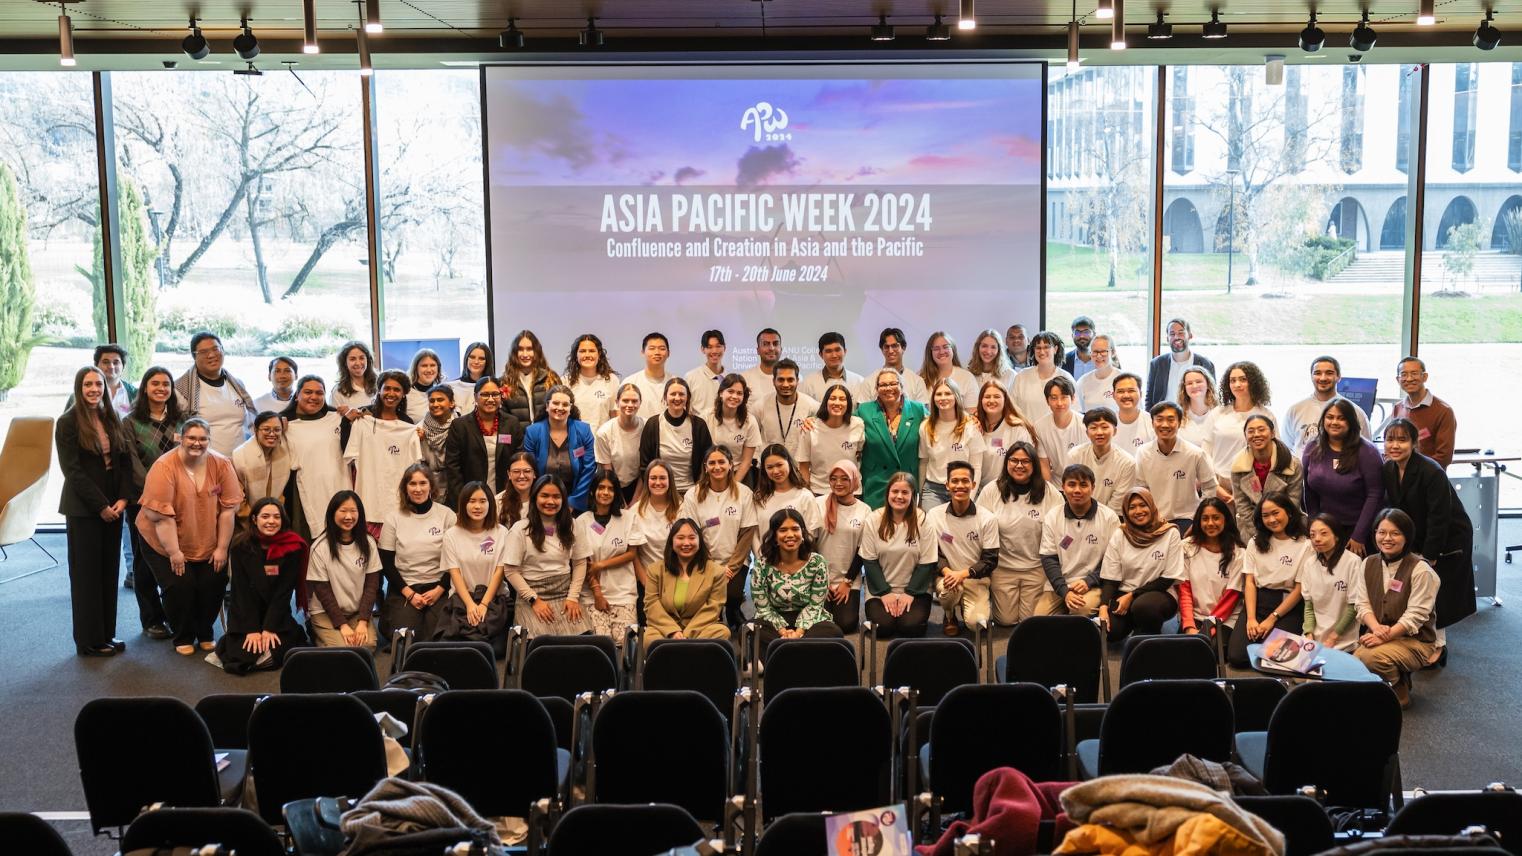 The 2024 Asia Pacific Week delegation. Image by Luka Vertessy, ANU College of Asia and the Pacific